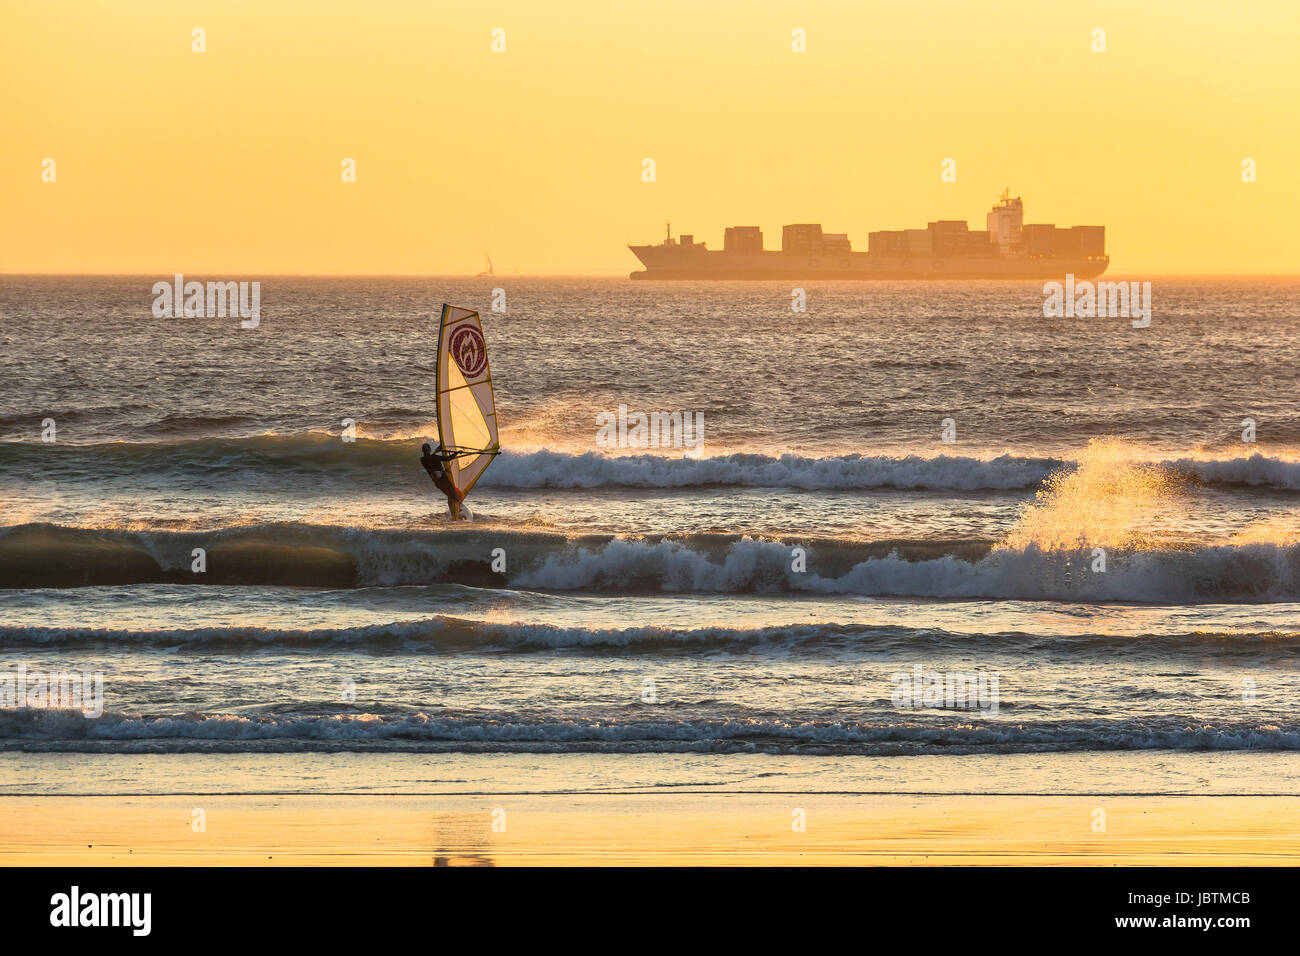 Kitesurfer surfing in the sunset on beach in Cape Town Stock Photo